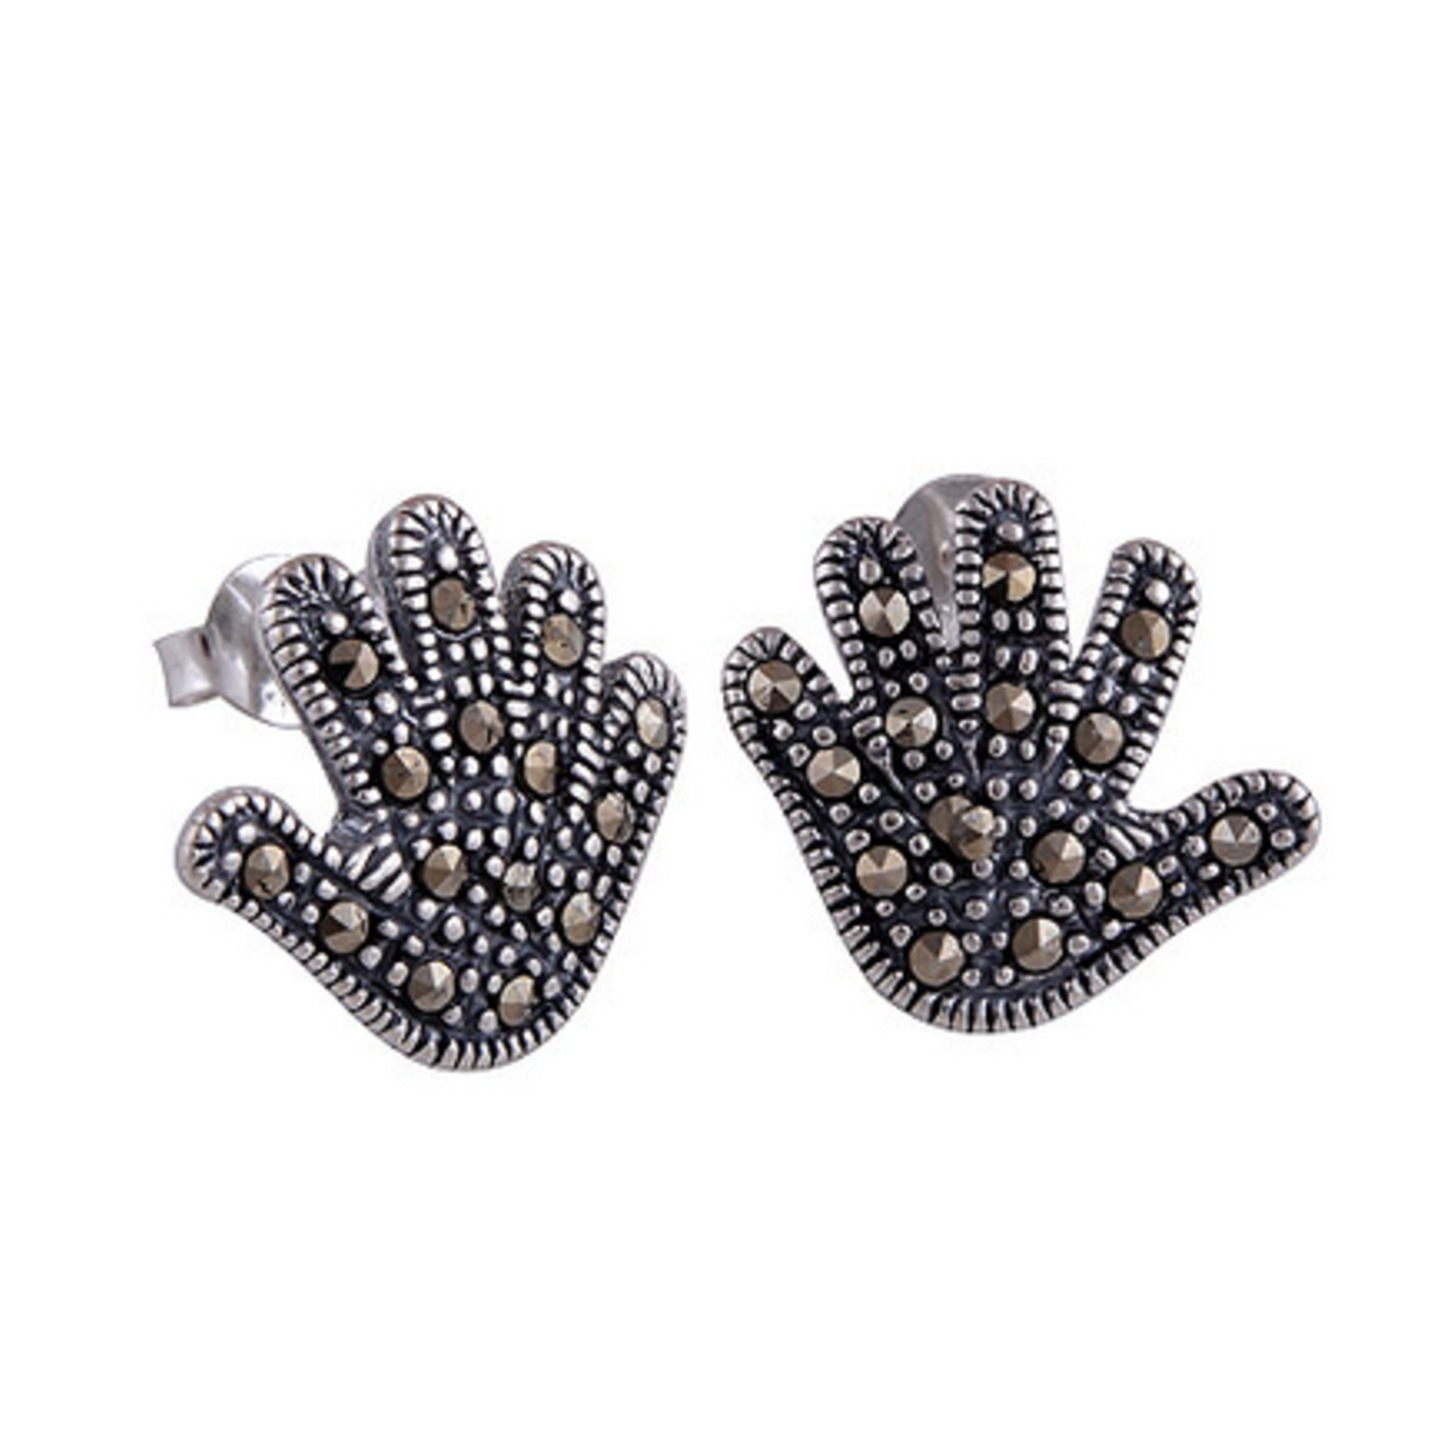 The Face Palm Marcasite Silver Earrings